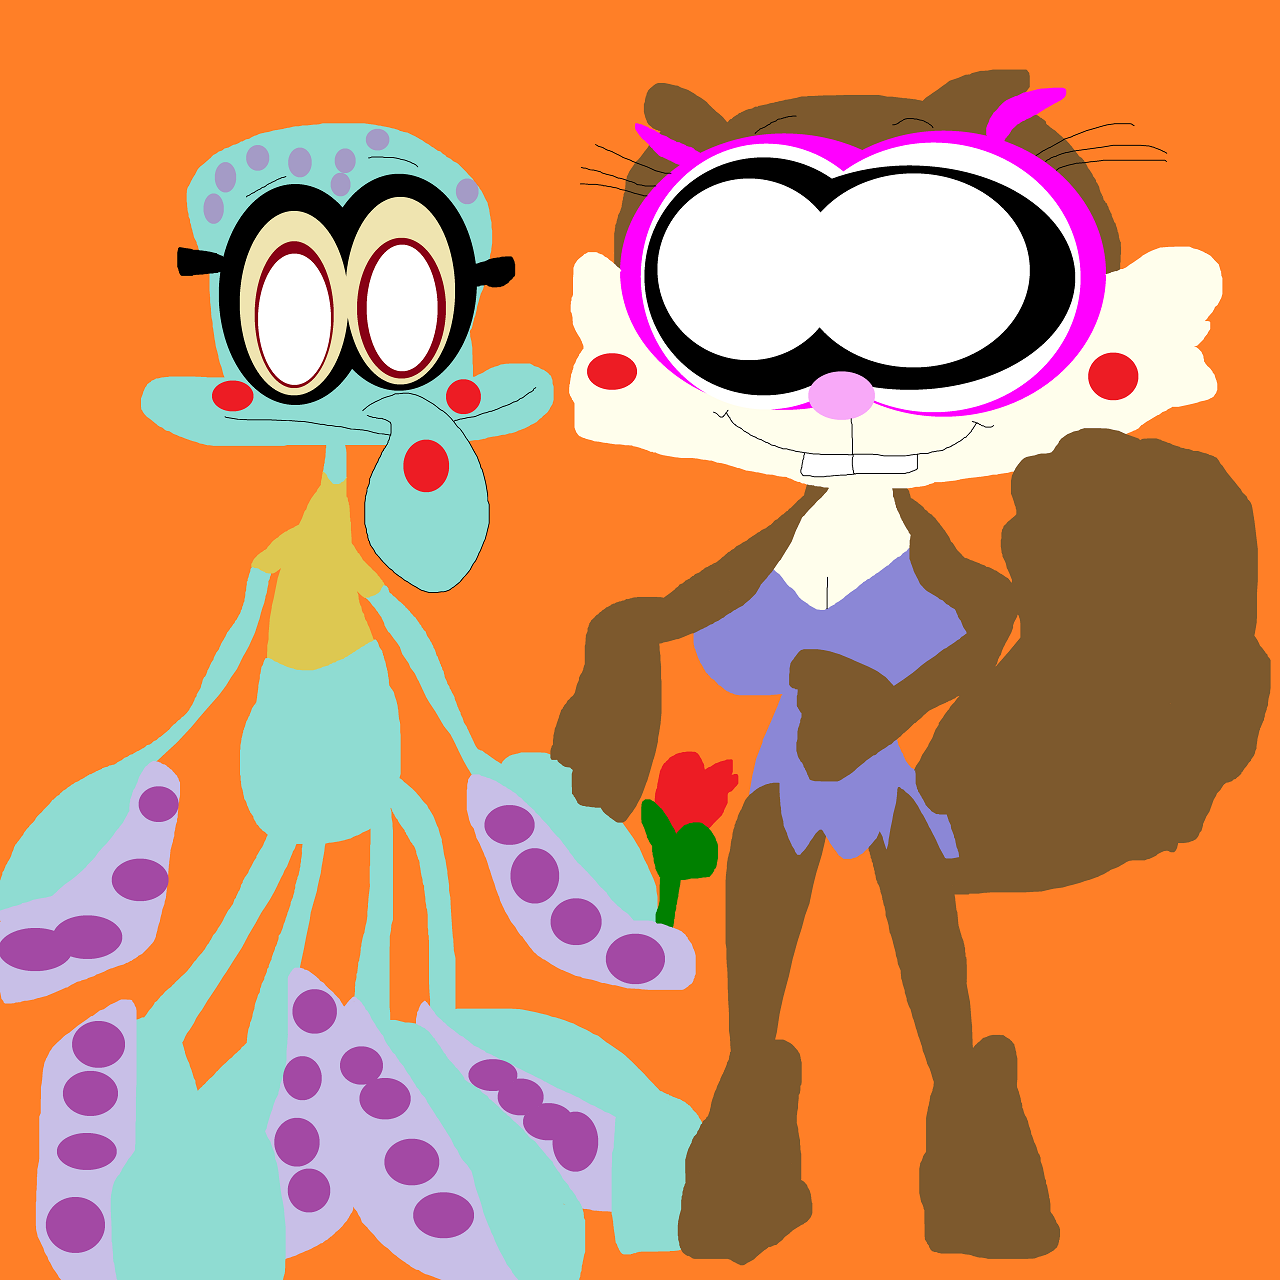 Squidward And Sandy On A Date Mix Of Show Styles by Falconlobo